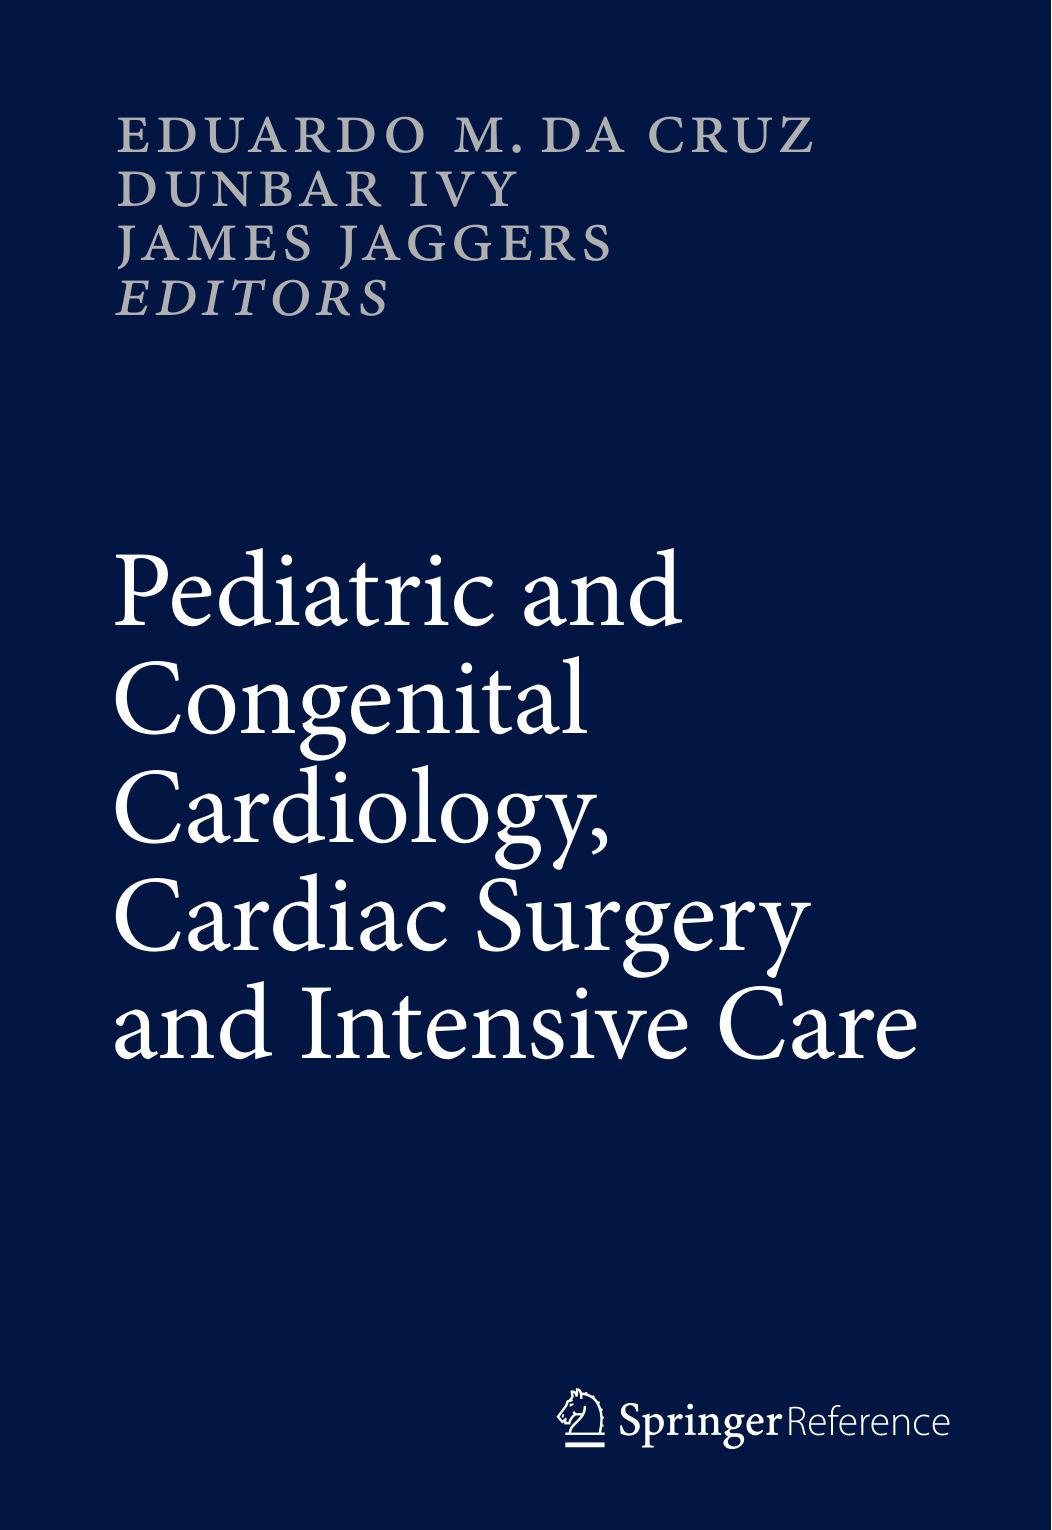 Pediatric and Congenital Cardiology, Cardiac Surgery and Intensive Care 2014